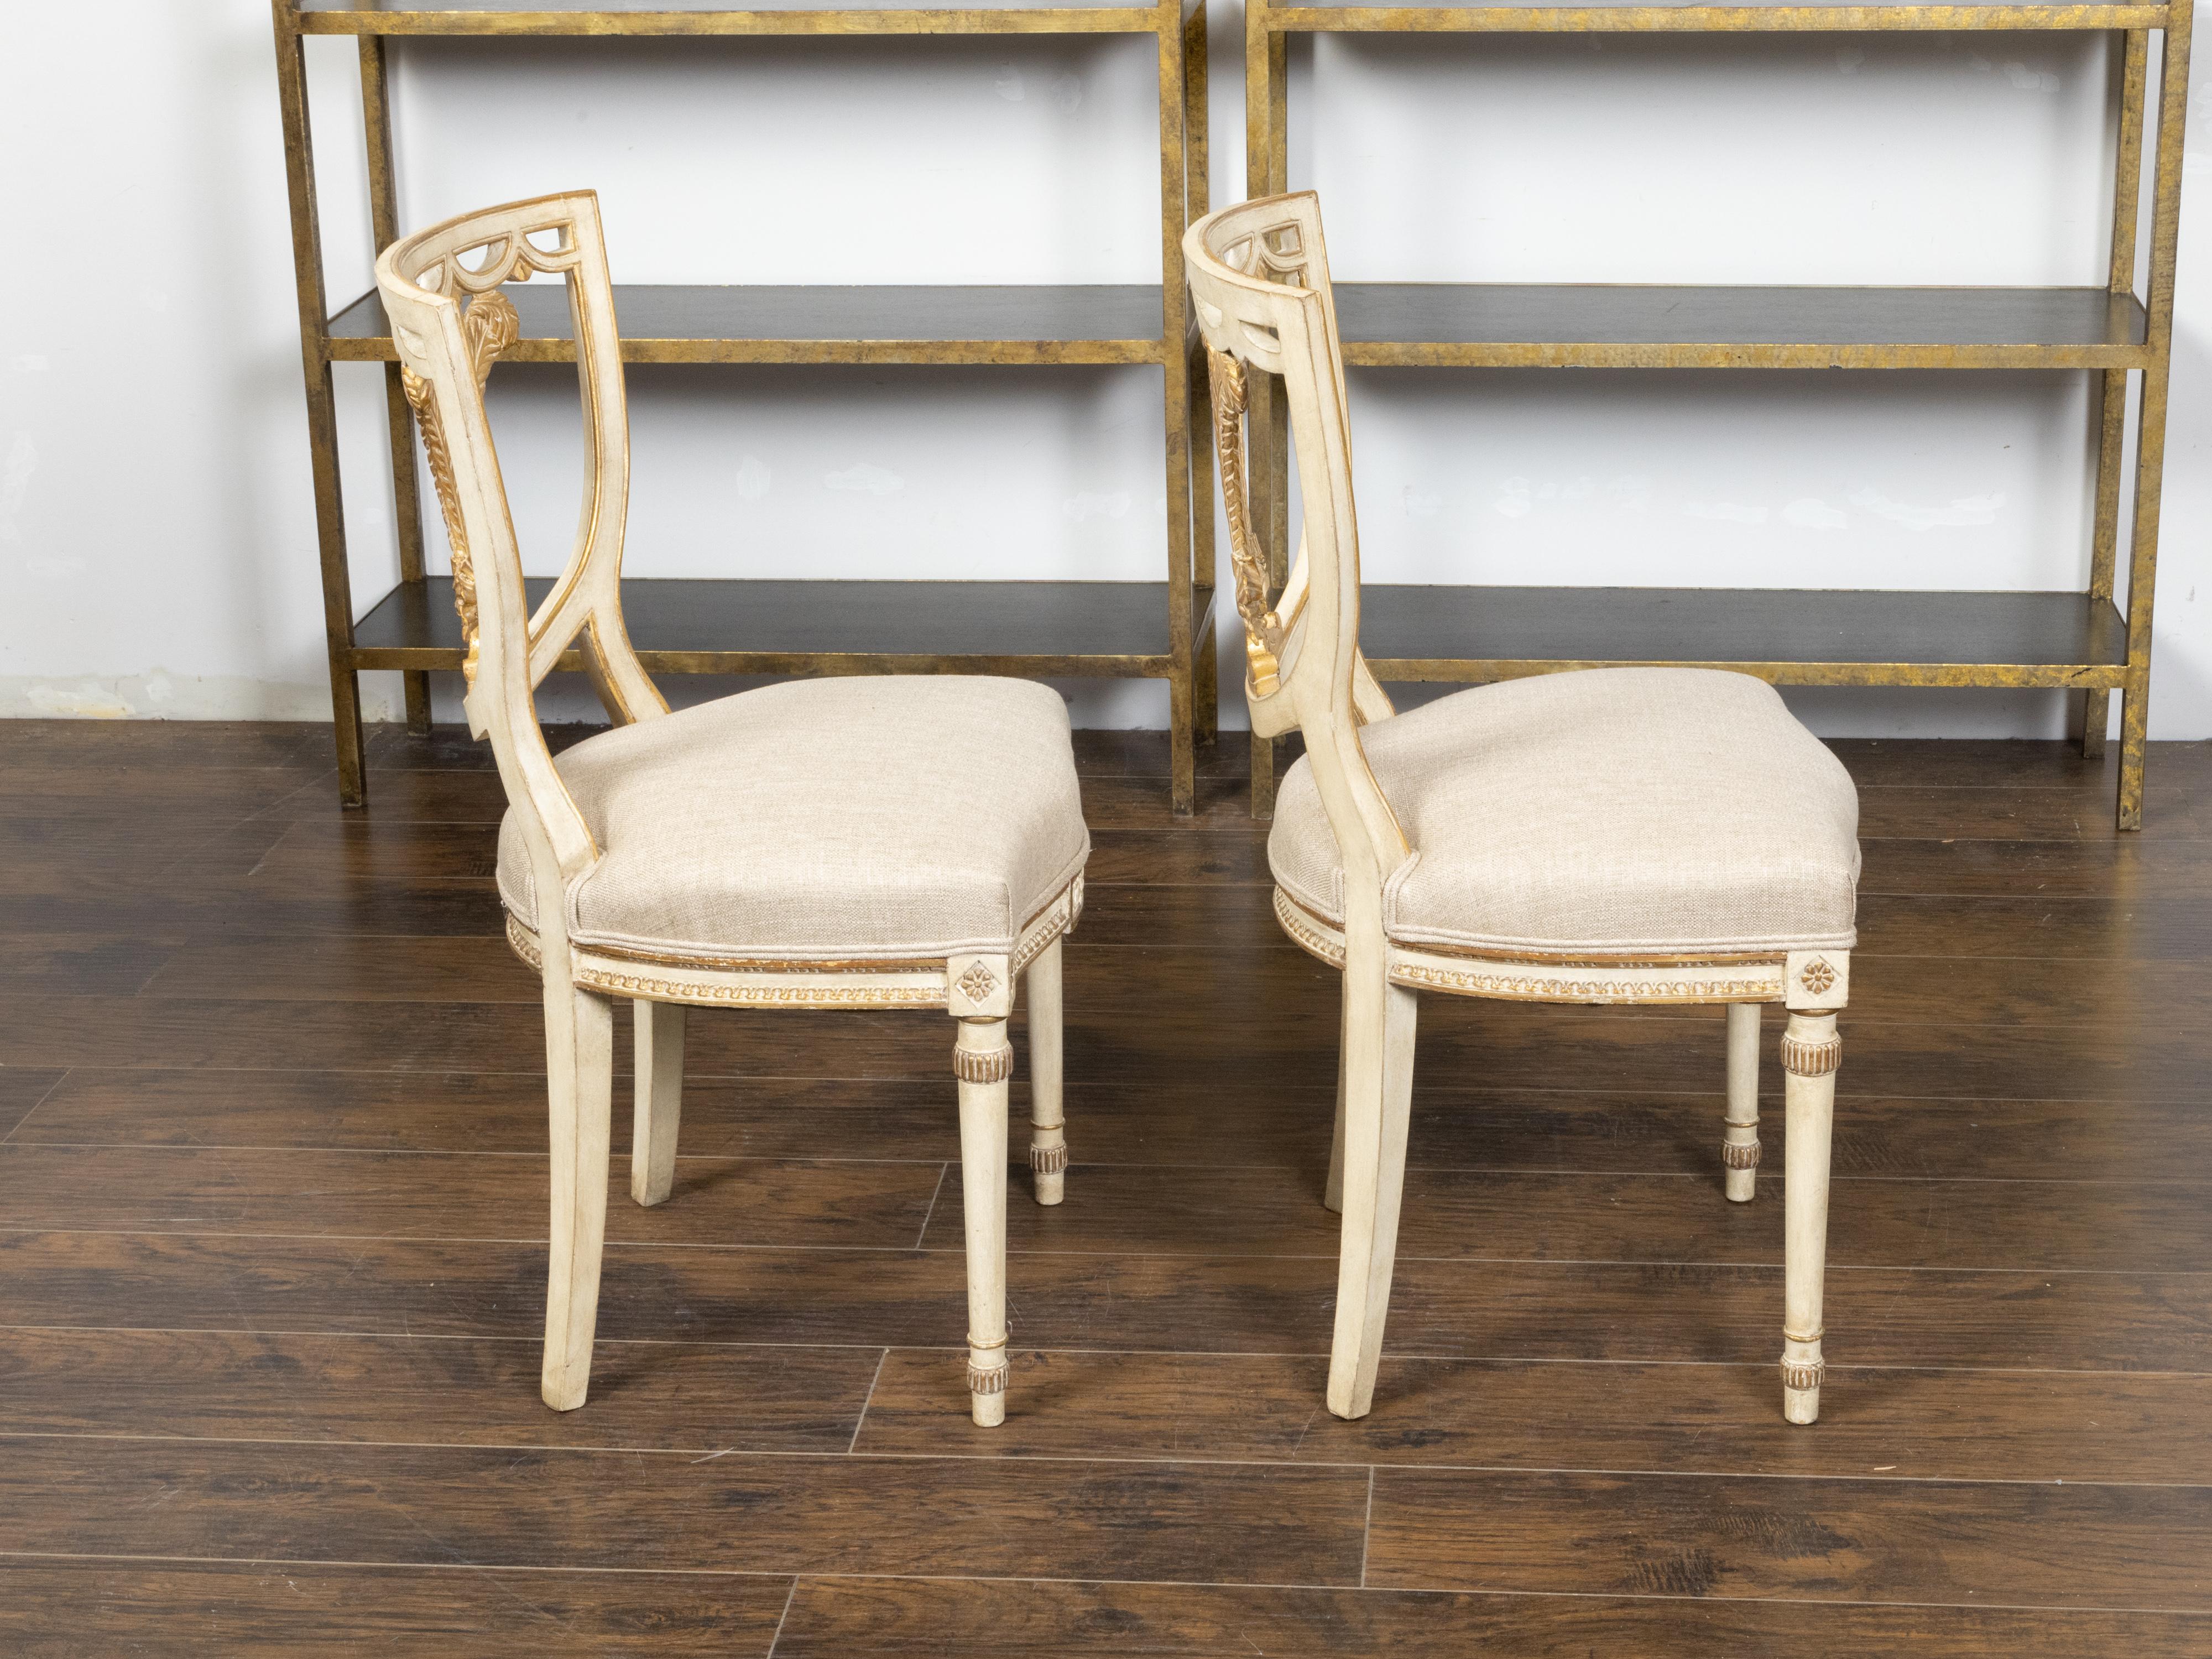 Pair of English 1900s Neoclassical Style Painted and Gilt Chairs with Feathers For Sale 2